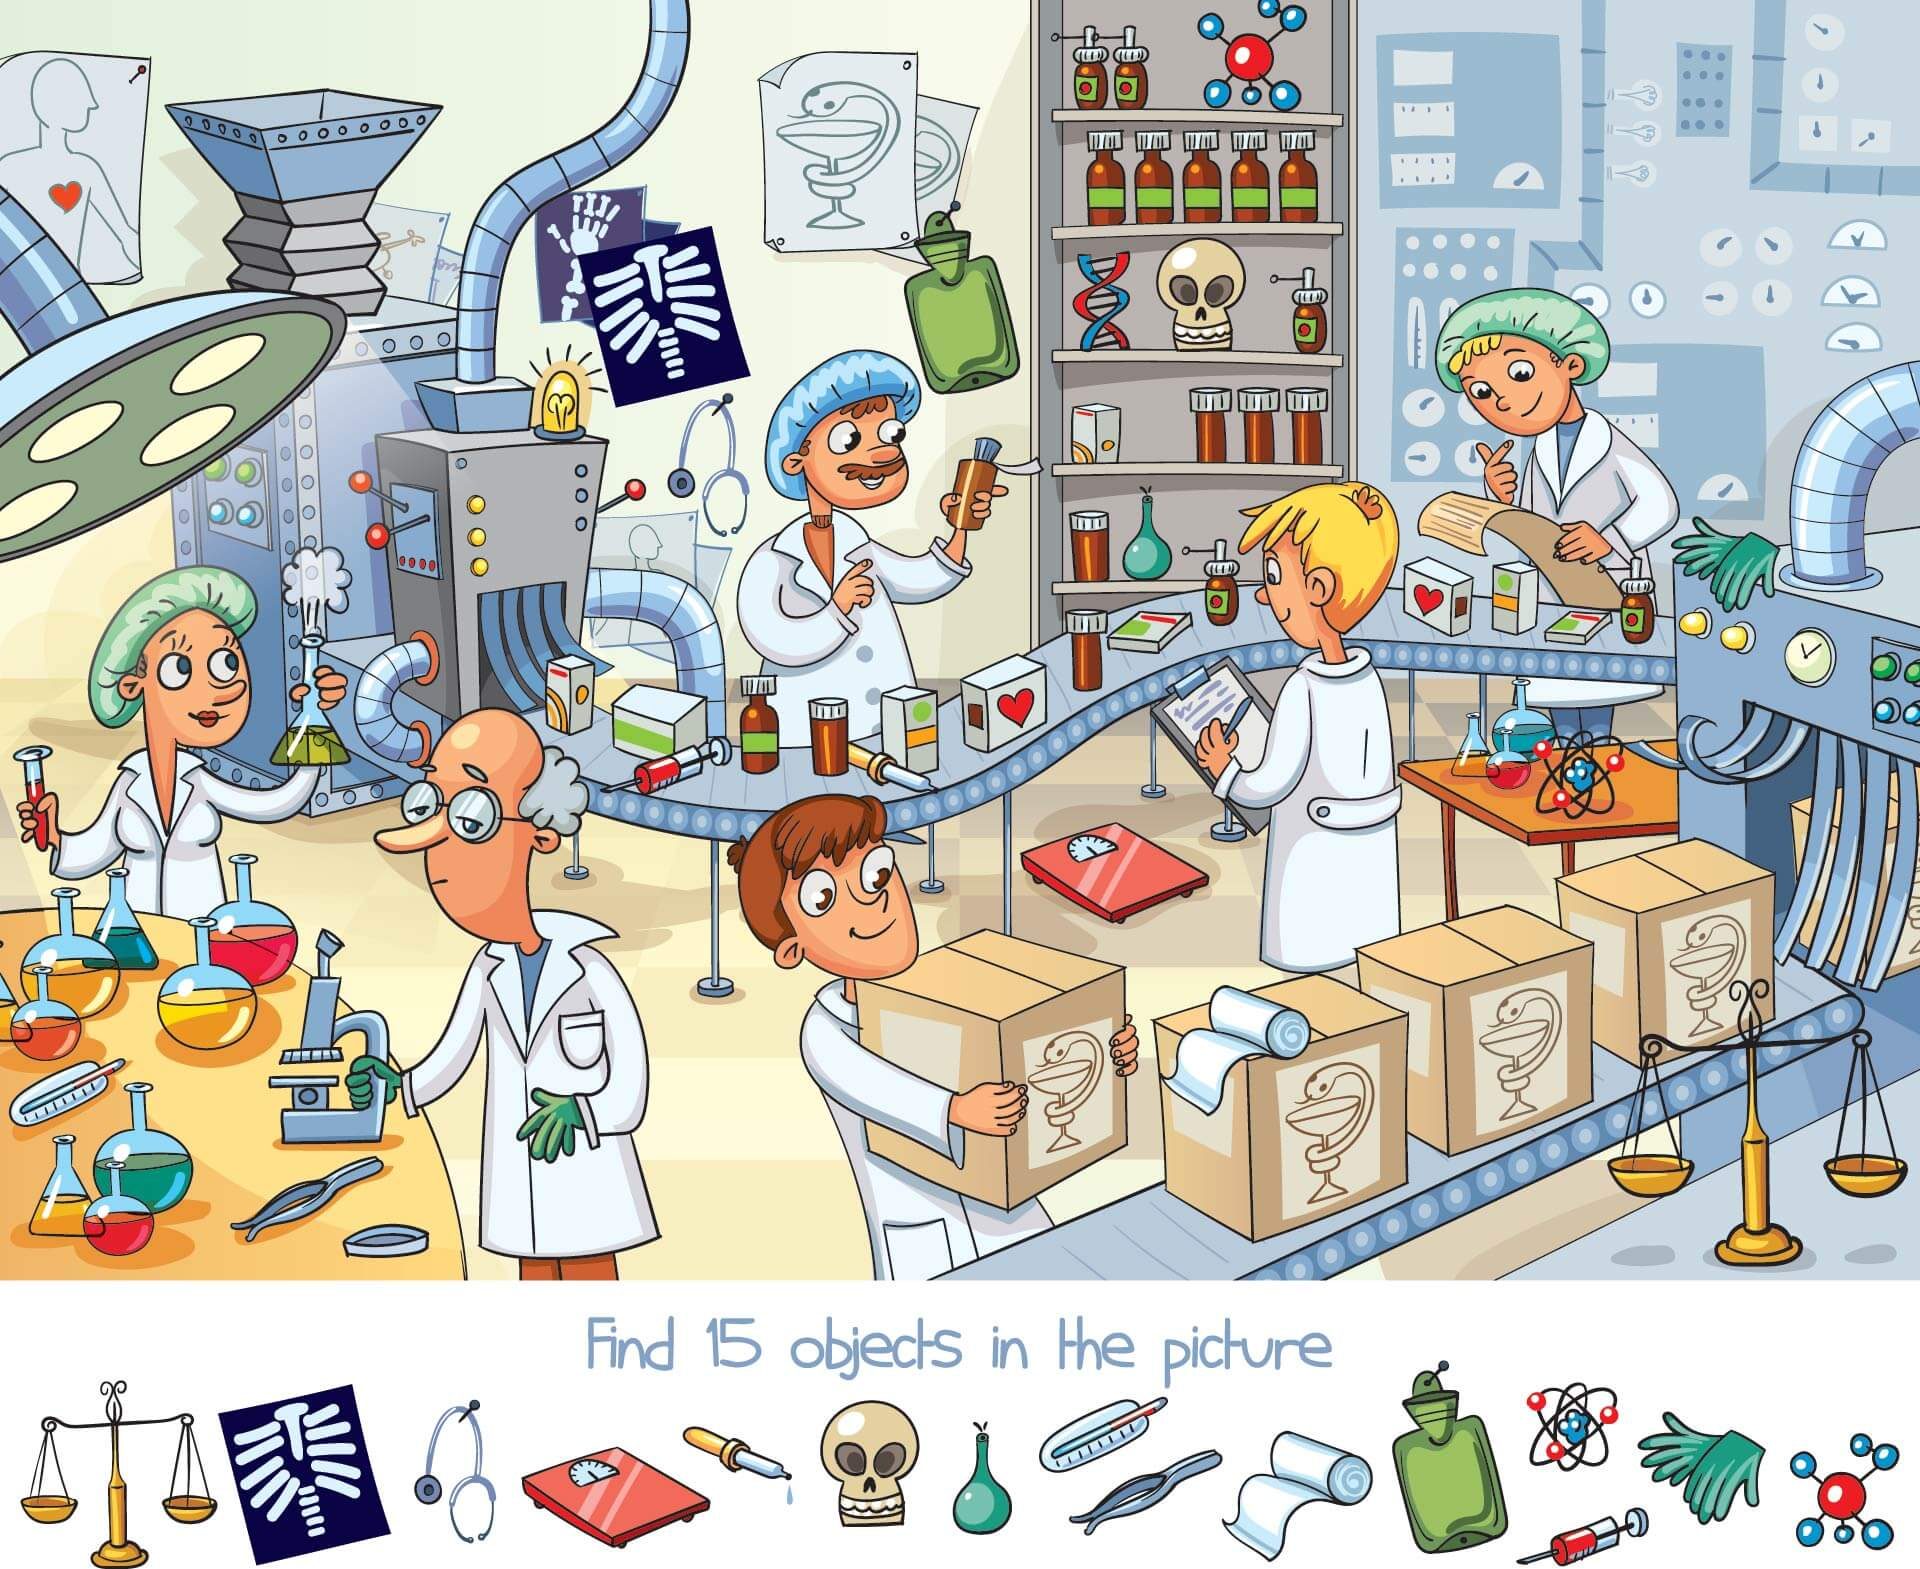 Can You Find the 15 Objects Hidden in This Picture? | Reader's Digest